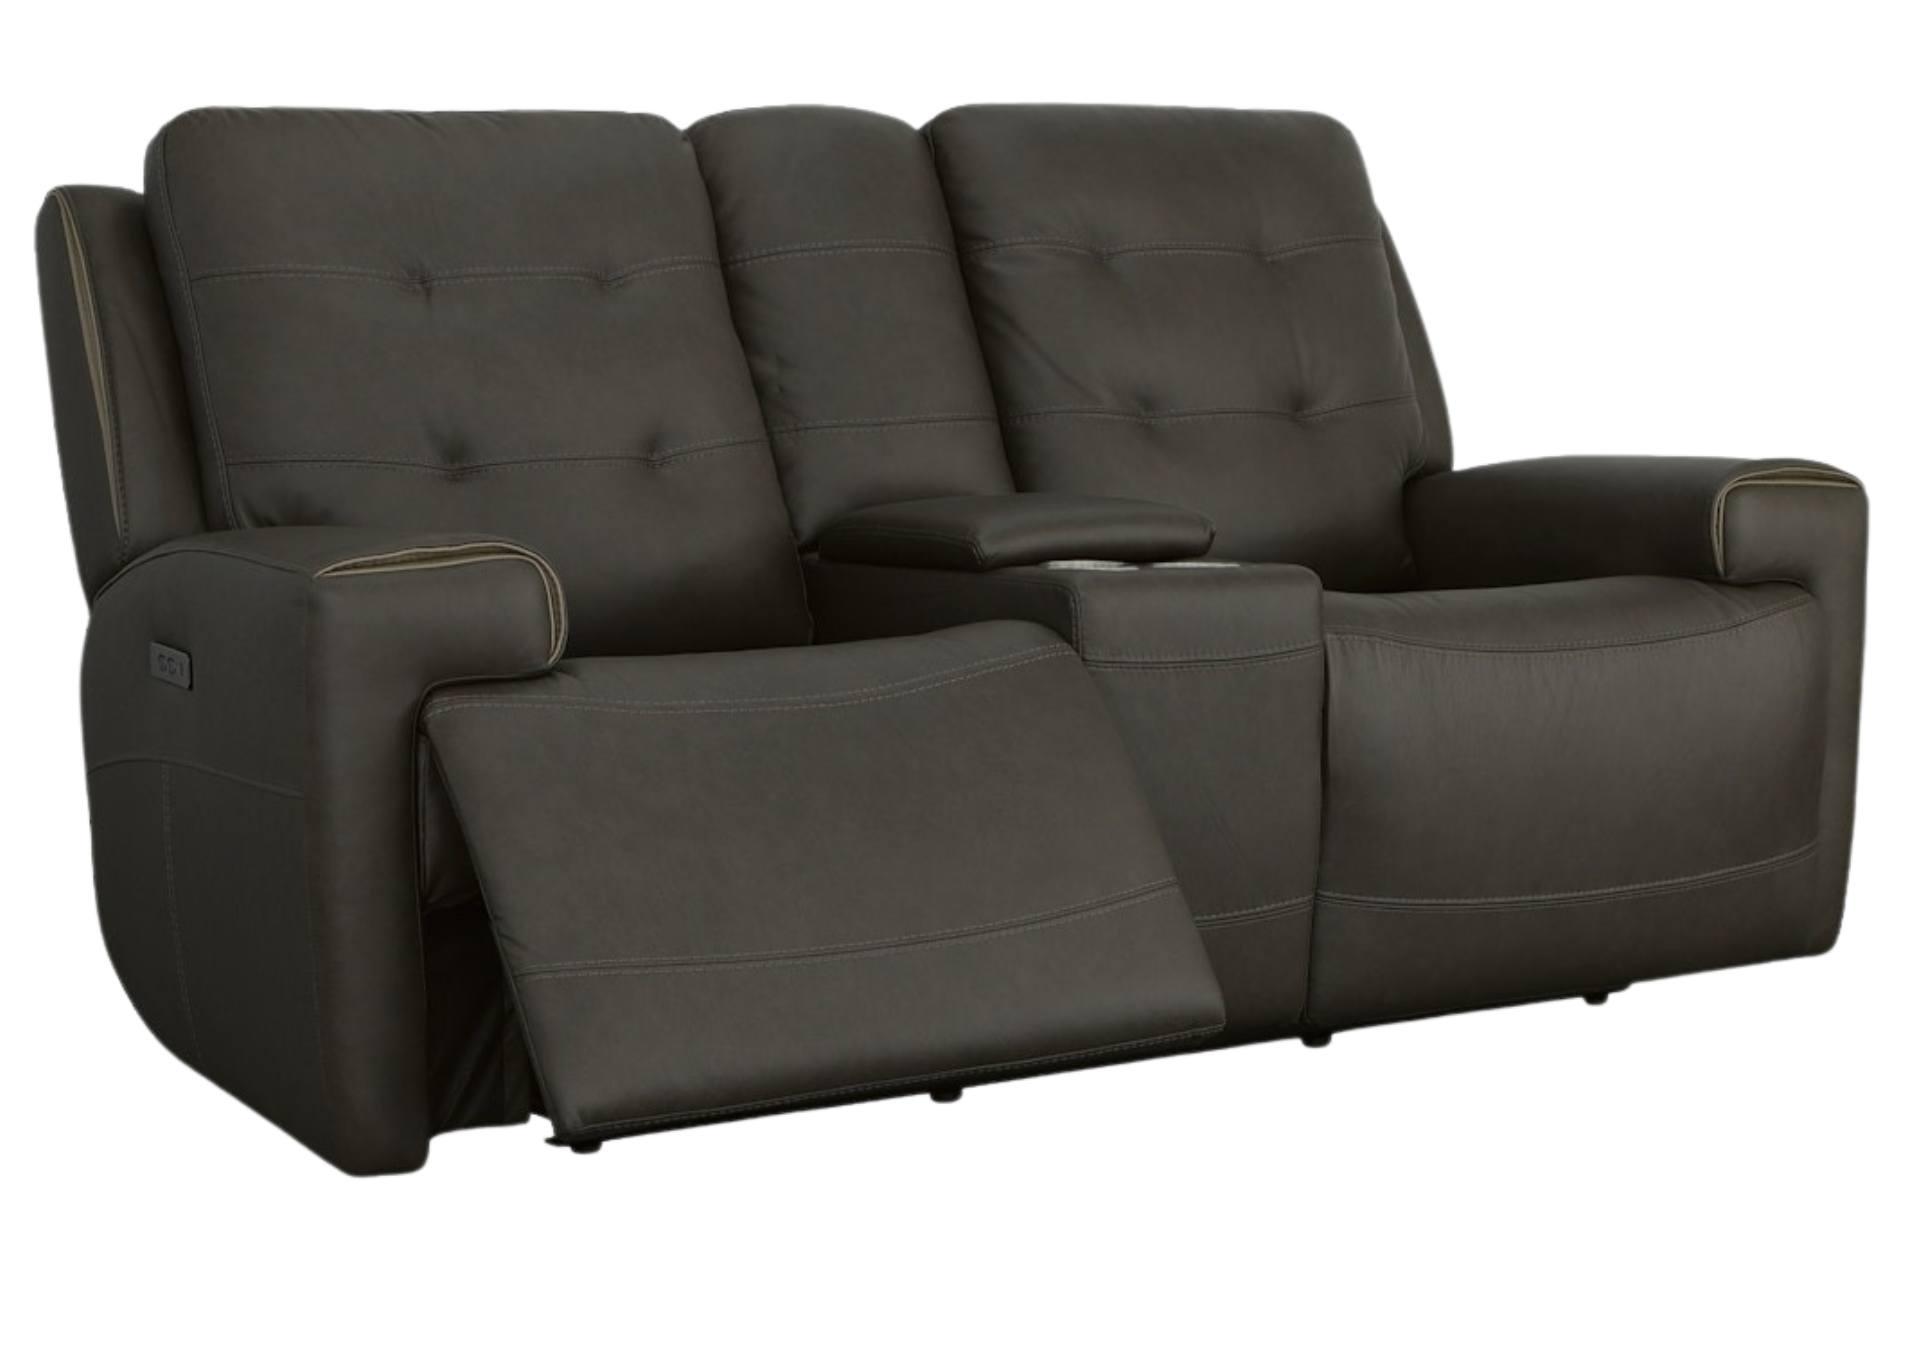 IRIS CHARCOAL RECLINING POWER LOVESEAT WITH CONSOLE P2,FLEXSTEEL INDUSTRIES INC.